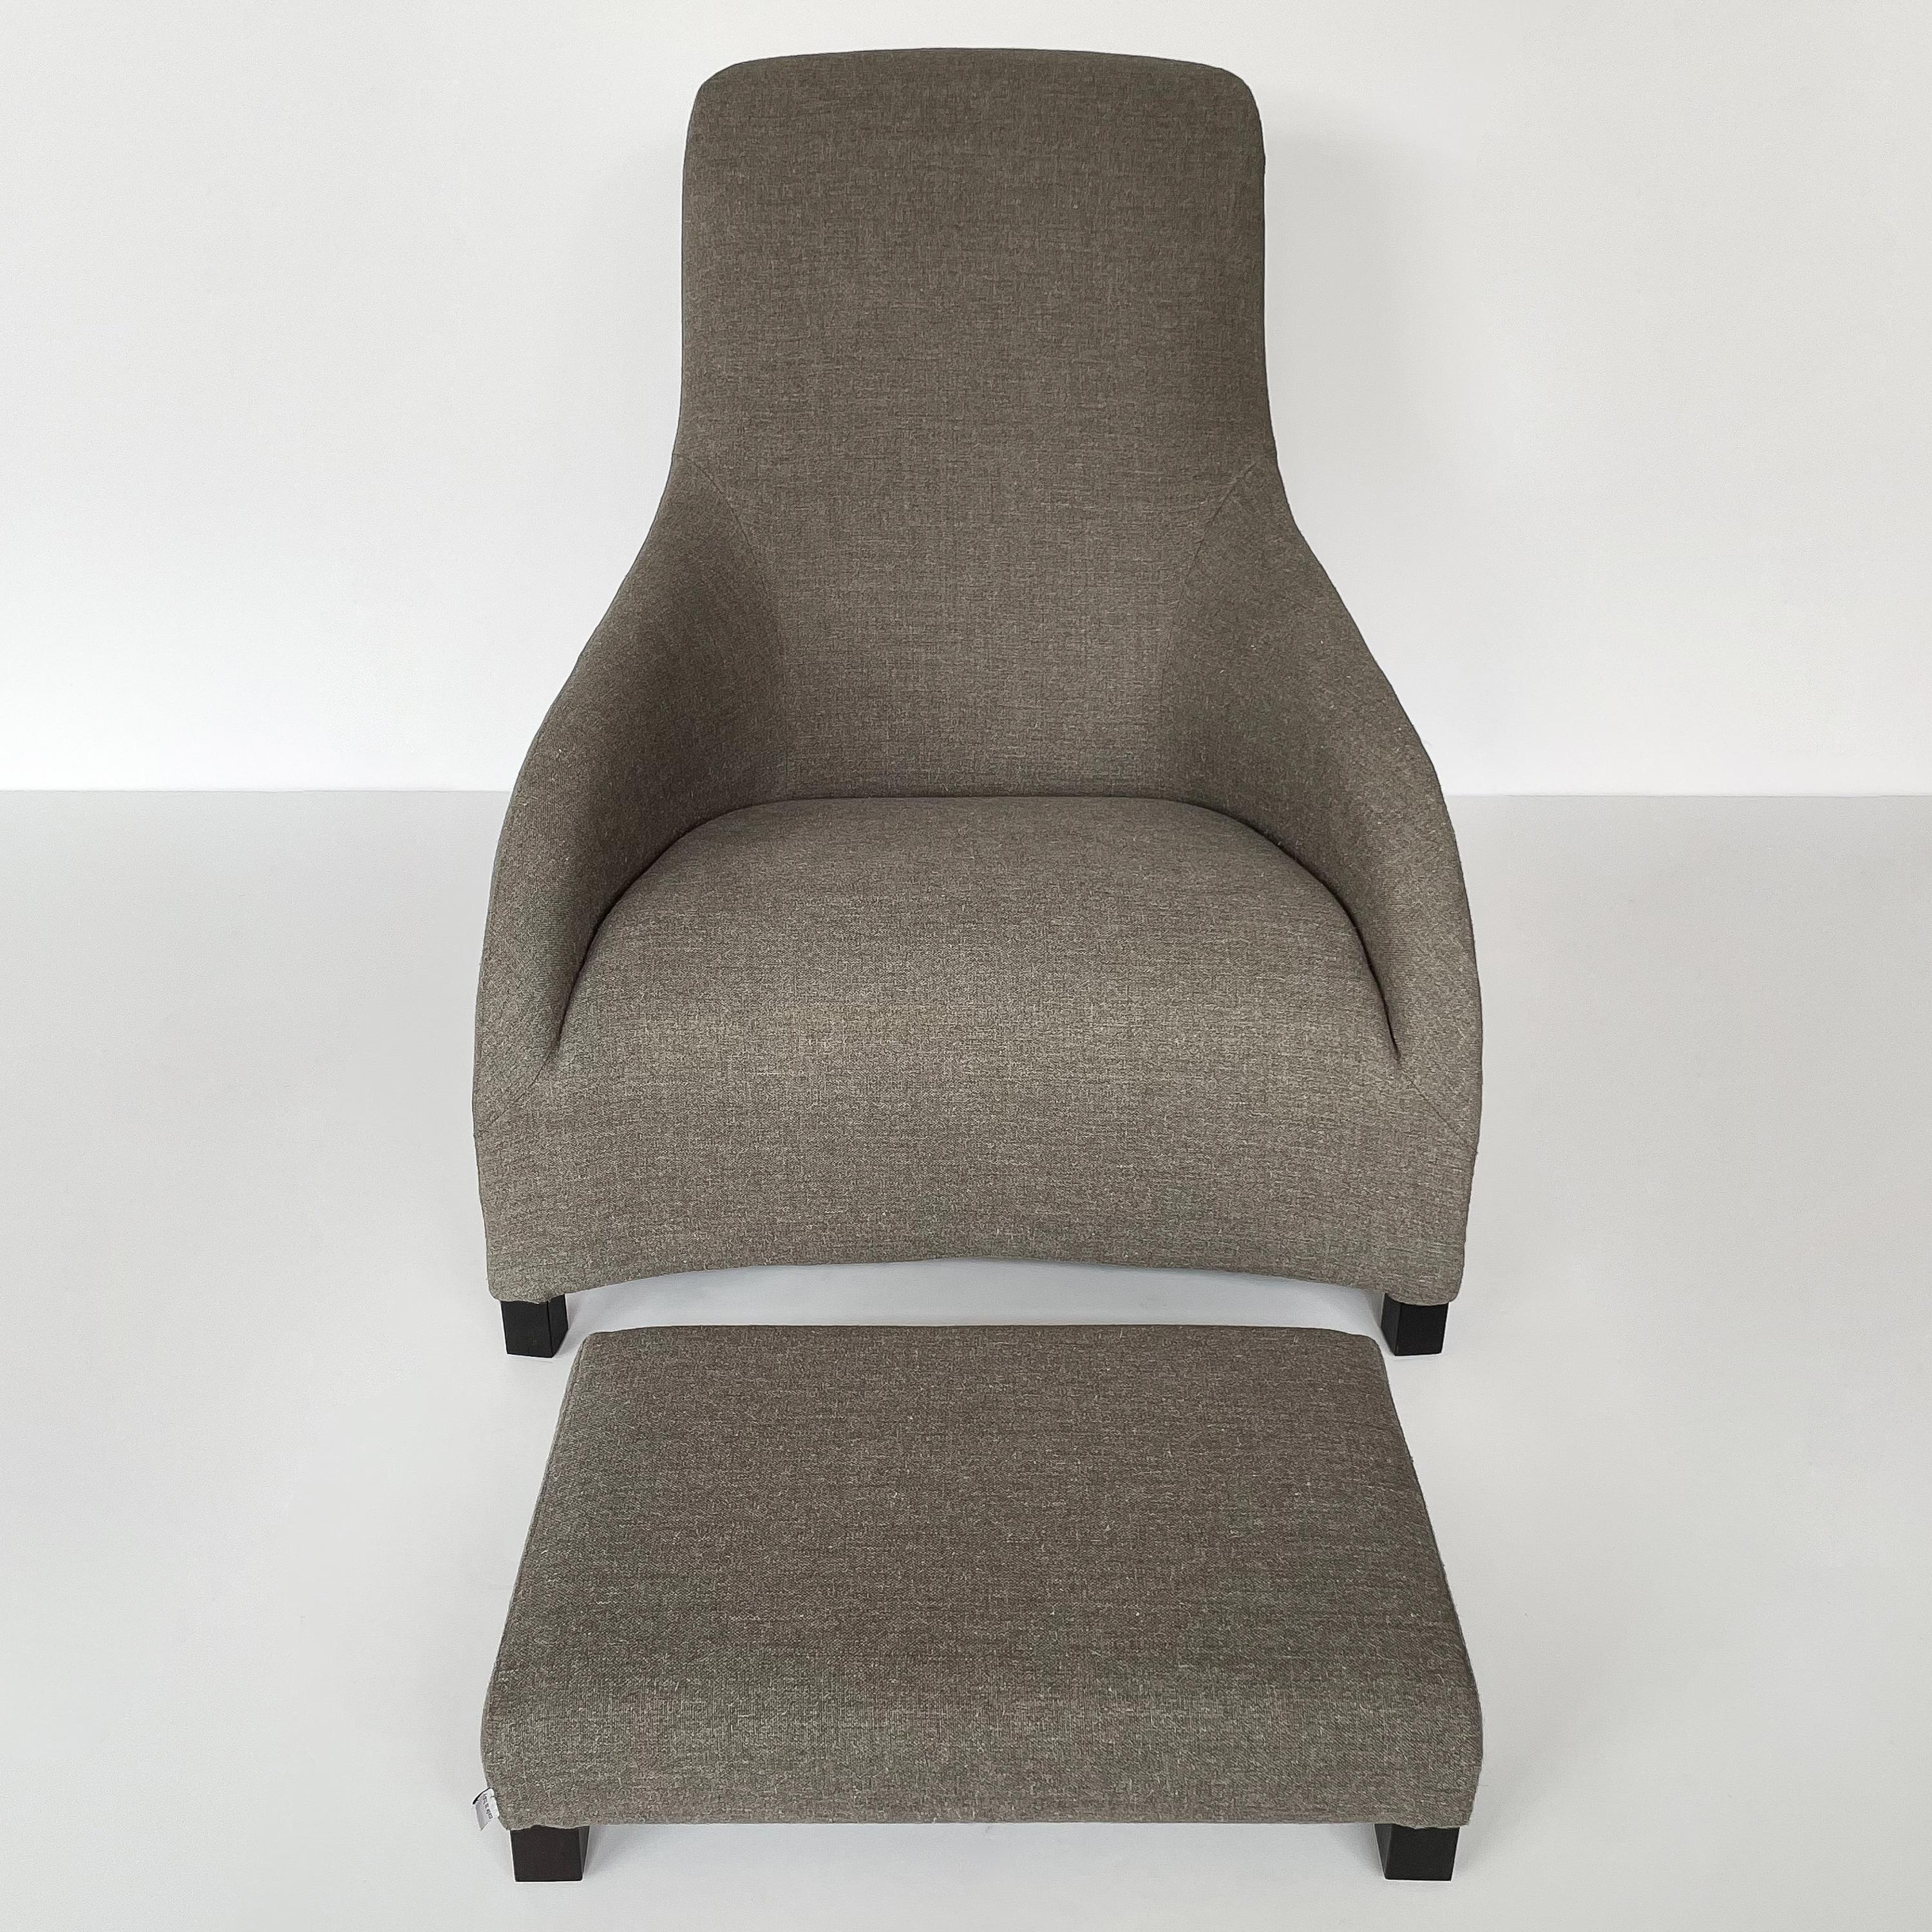 Stained Kalos Lounge Chair and Ottoman by Antonio Citterio for B&B Italia